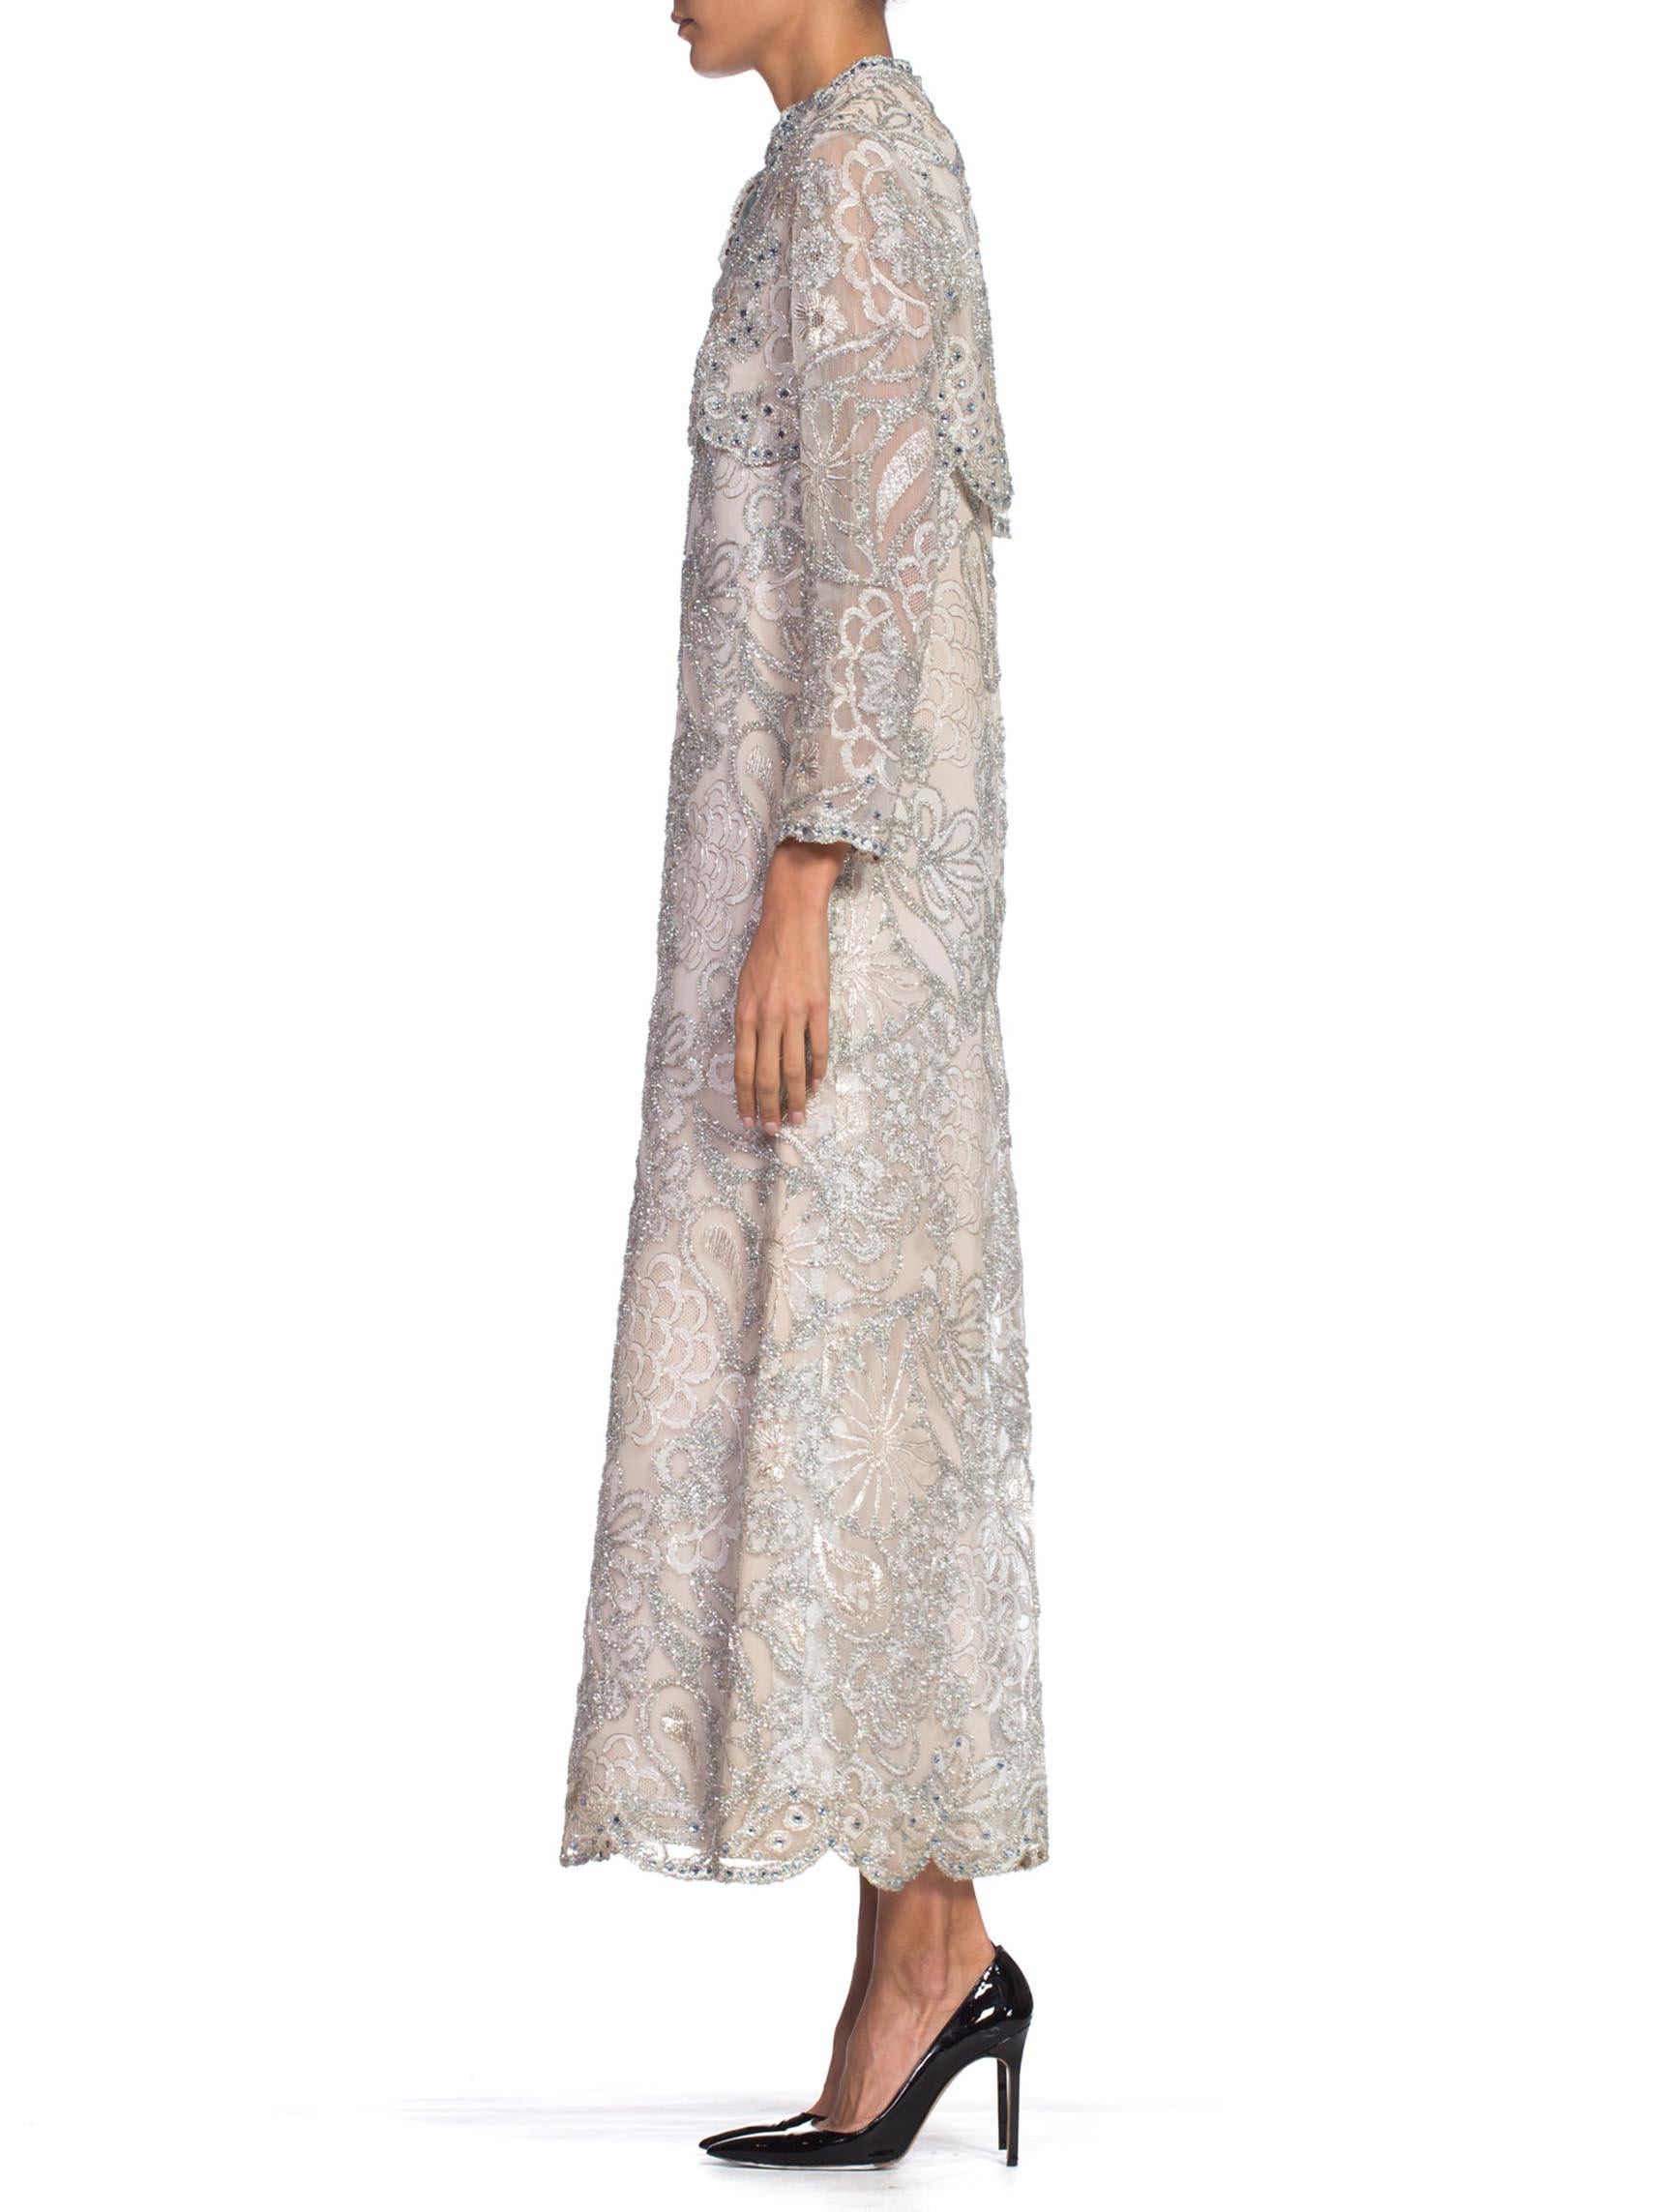 Haute Couture details such as pattern matched lace, hand finishing & horse hair structure. Fully lined in rayon, some slight discoloration from age.  1960S Oyster Grey Rayon Lace Empire Waist Sleeved Gown Embroidered With Real Silver & Lurex Tinsel